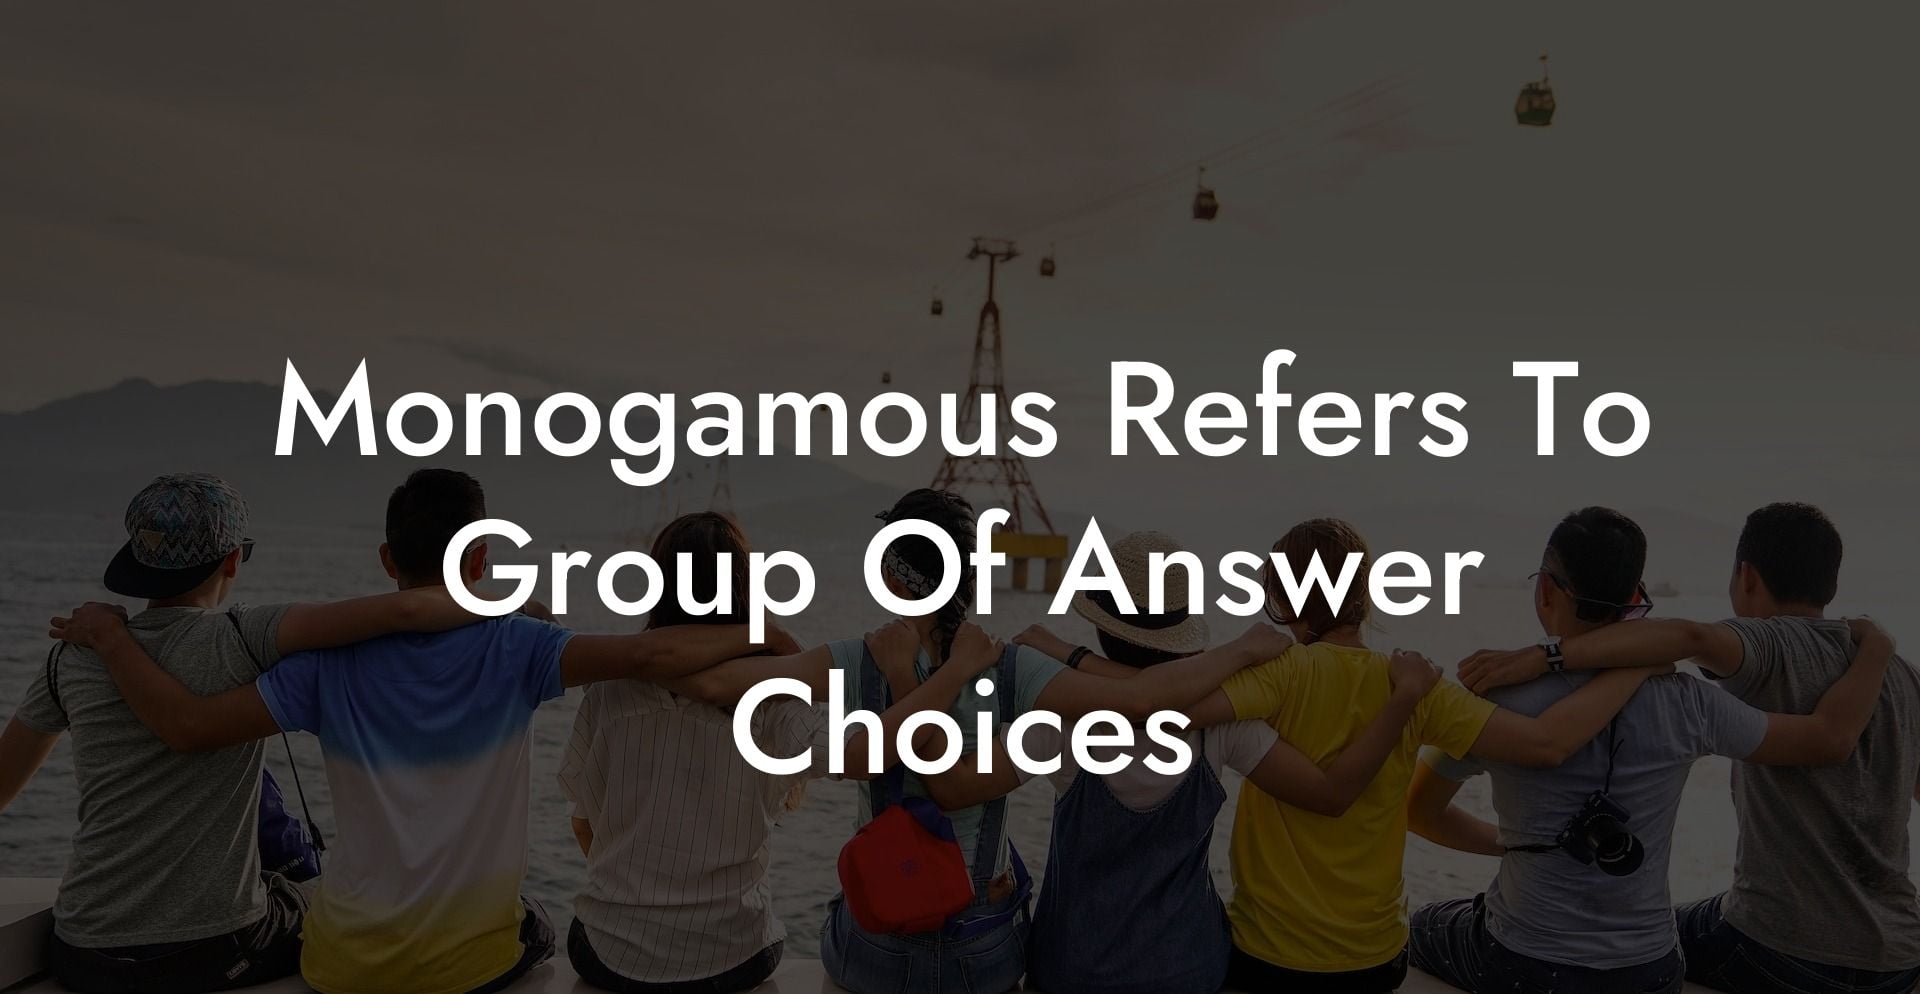 Monogamous Refers To Group Of Answer Choices